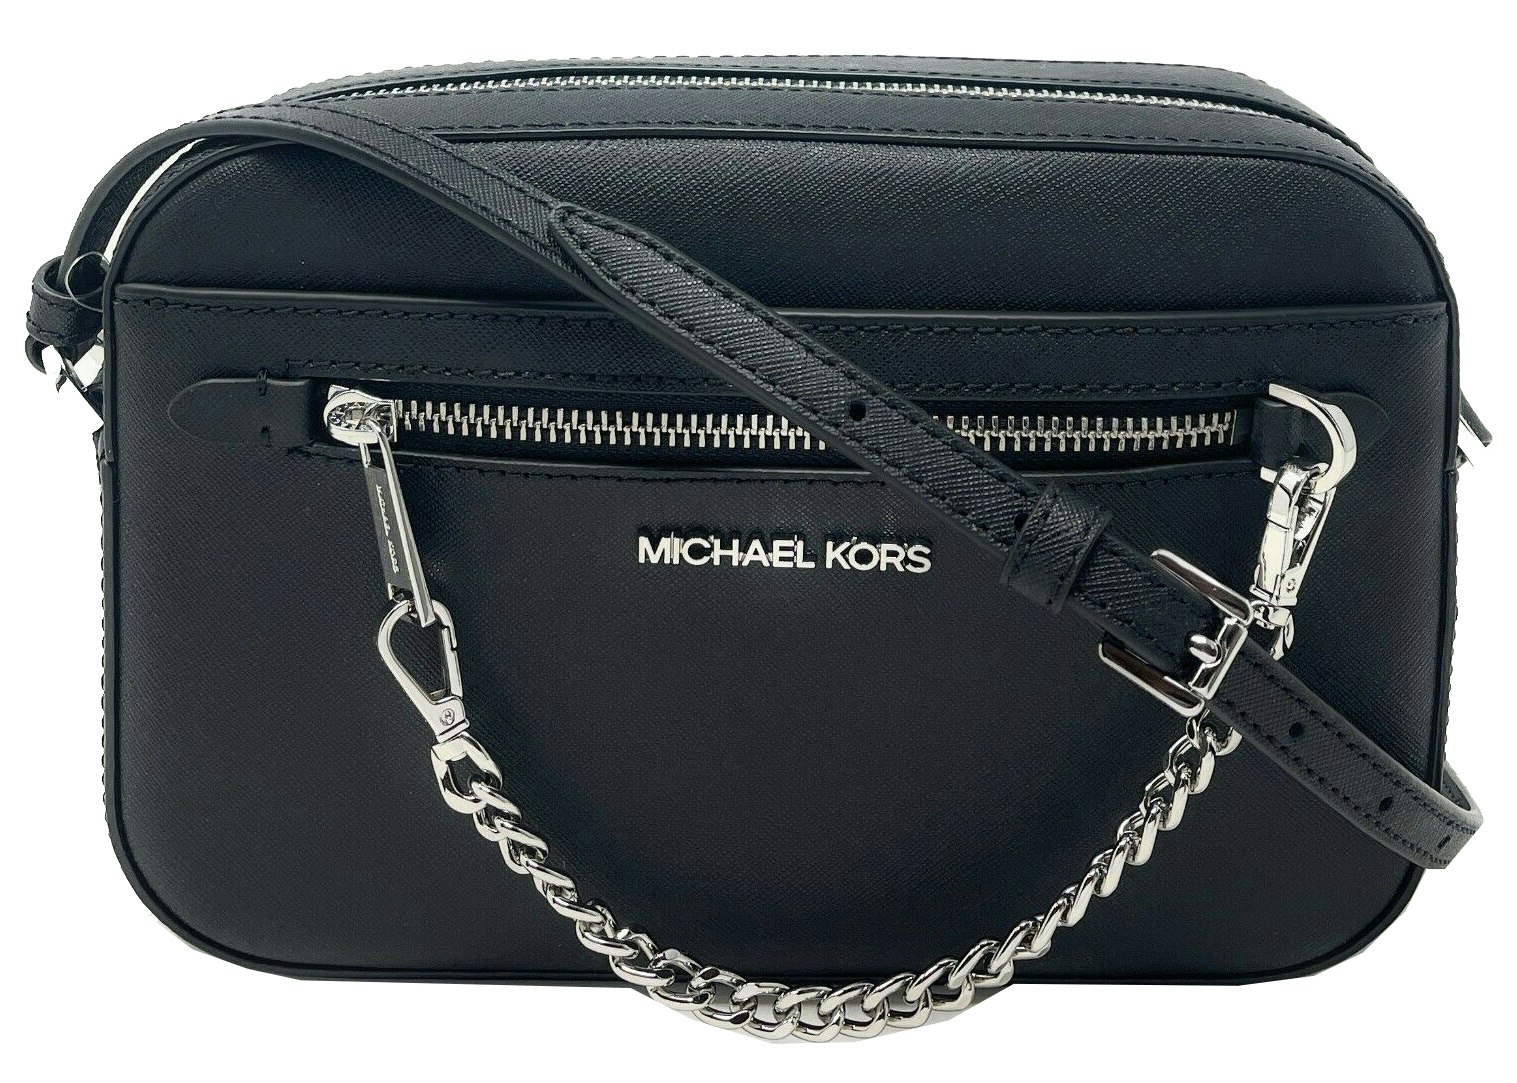 Michael Kors Jet Set Zip Chain Crossbody Bag Large BlackSilver in Saffiano  Leather with Silvertone  US